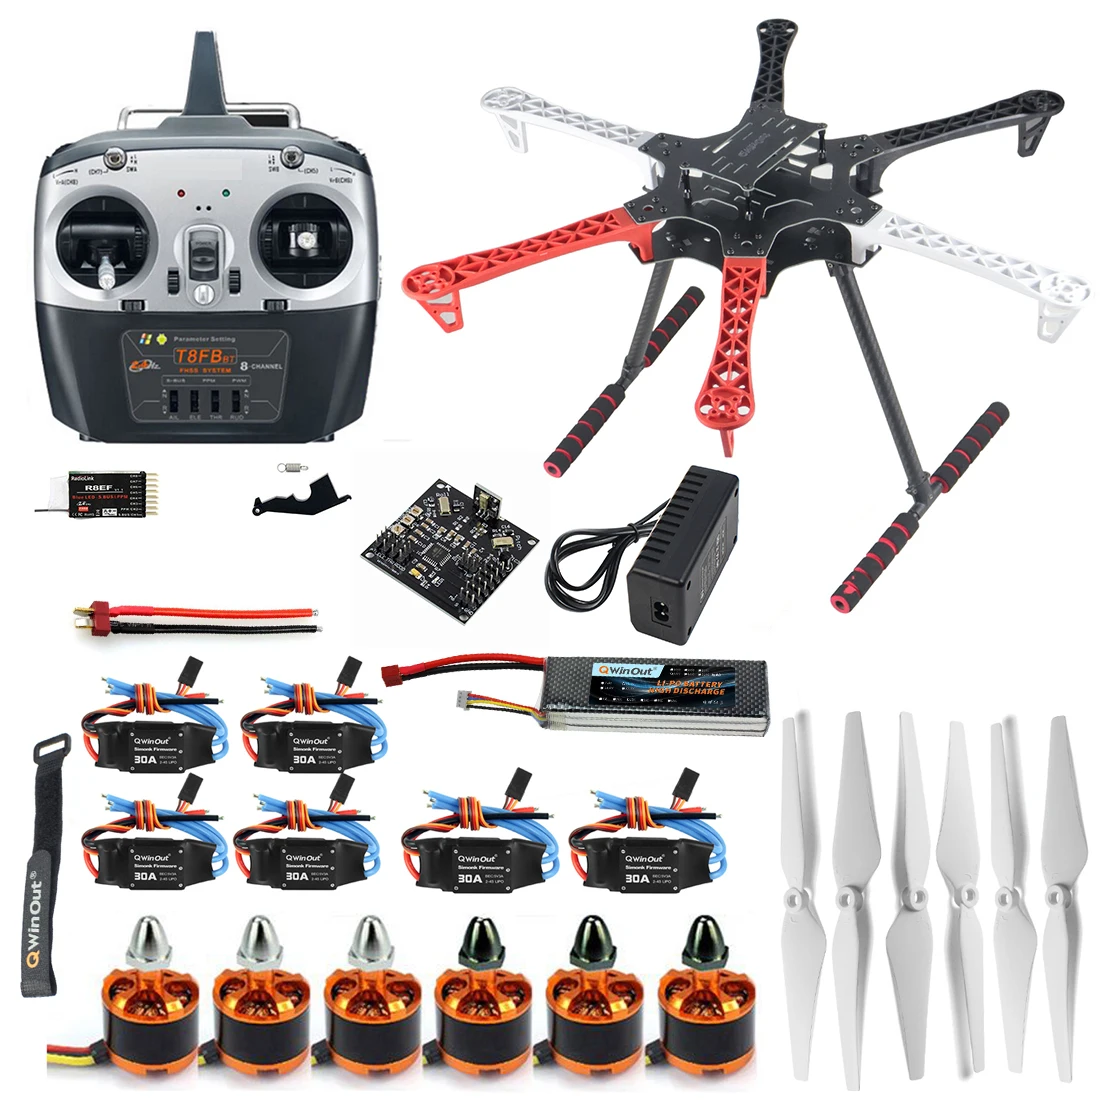 JMT DIY F550 6-Axle RC Hexacopter Drone Kit, Awinout Dunor Dtintu Owkn J0A J0